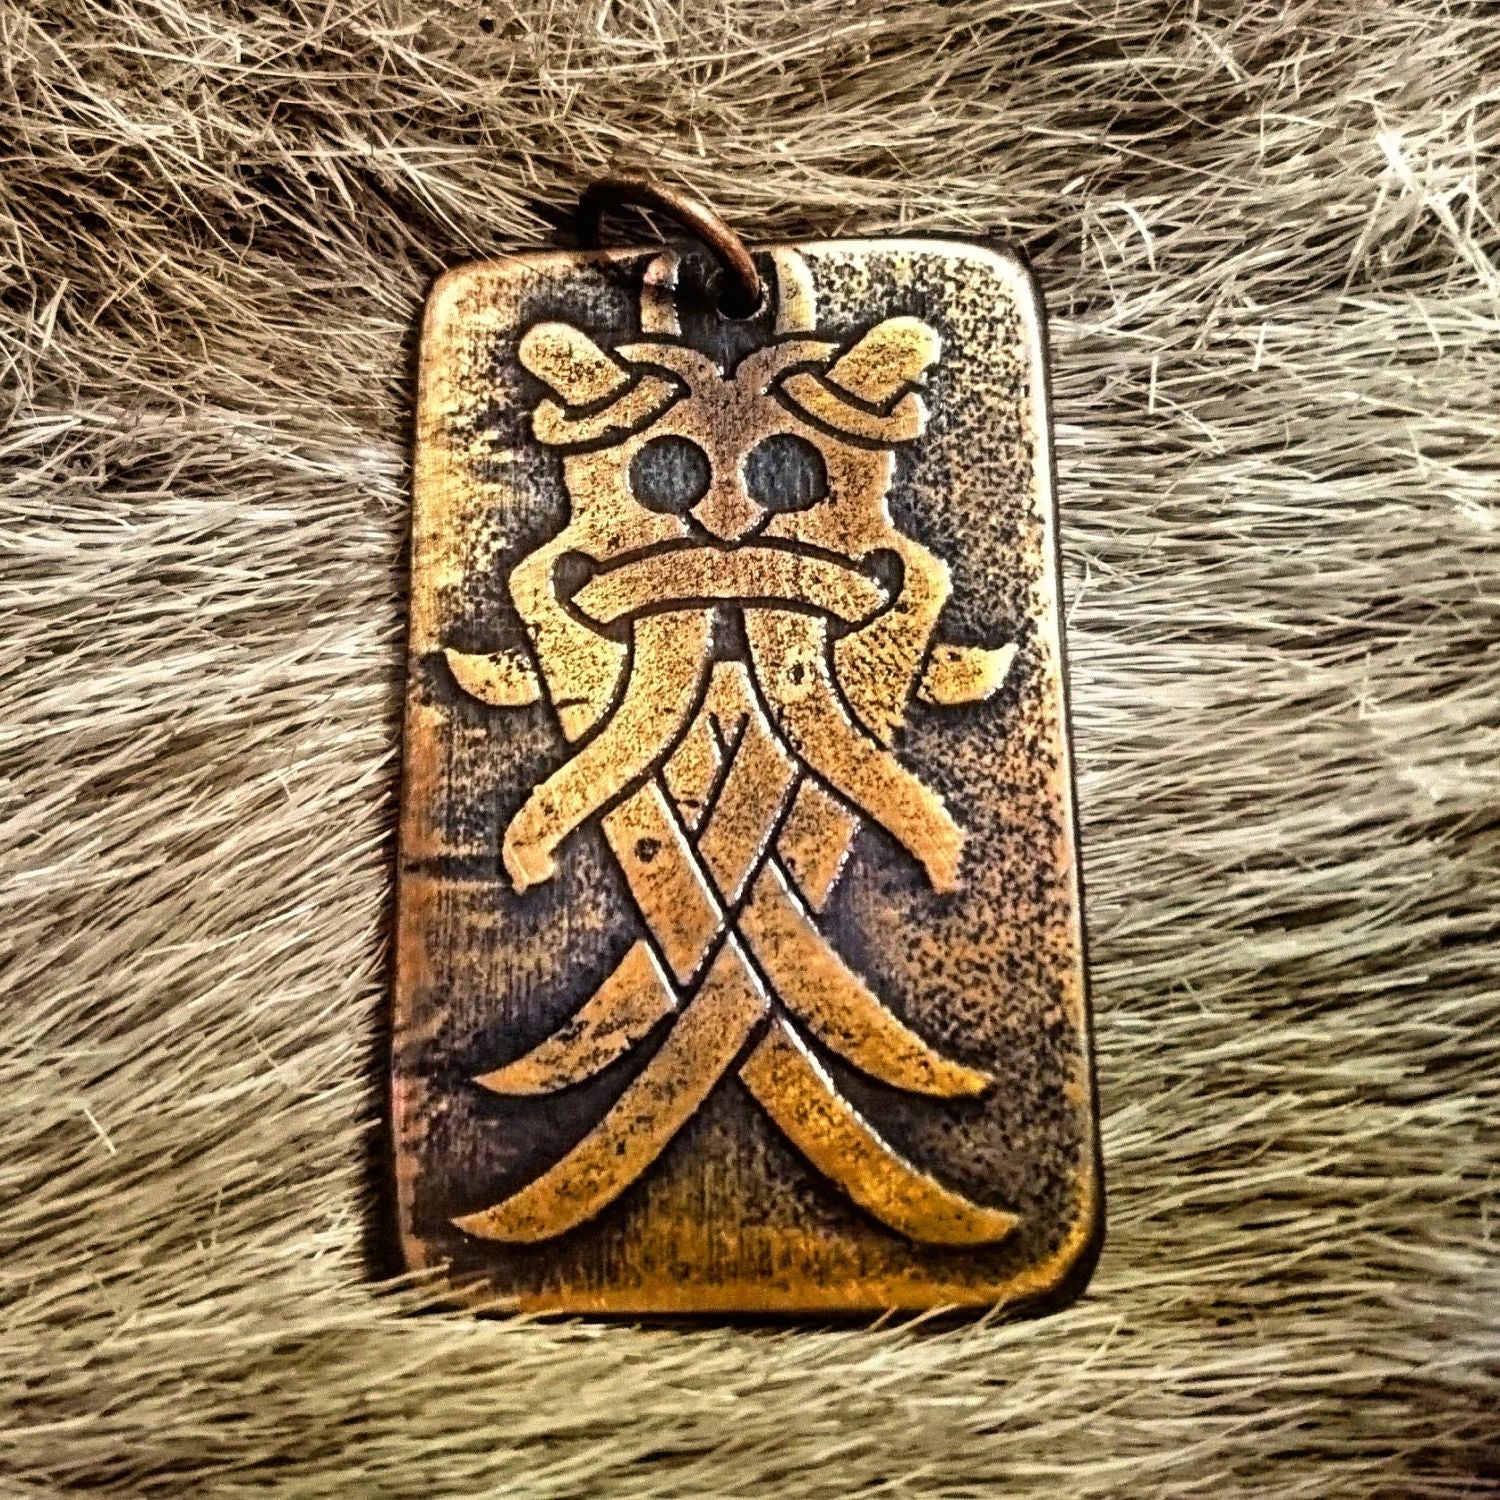 The Aarthus Mask (Odin's Mask) Pendant in Copper-Homage to the death of the Viking age Warrior